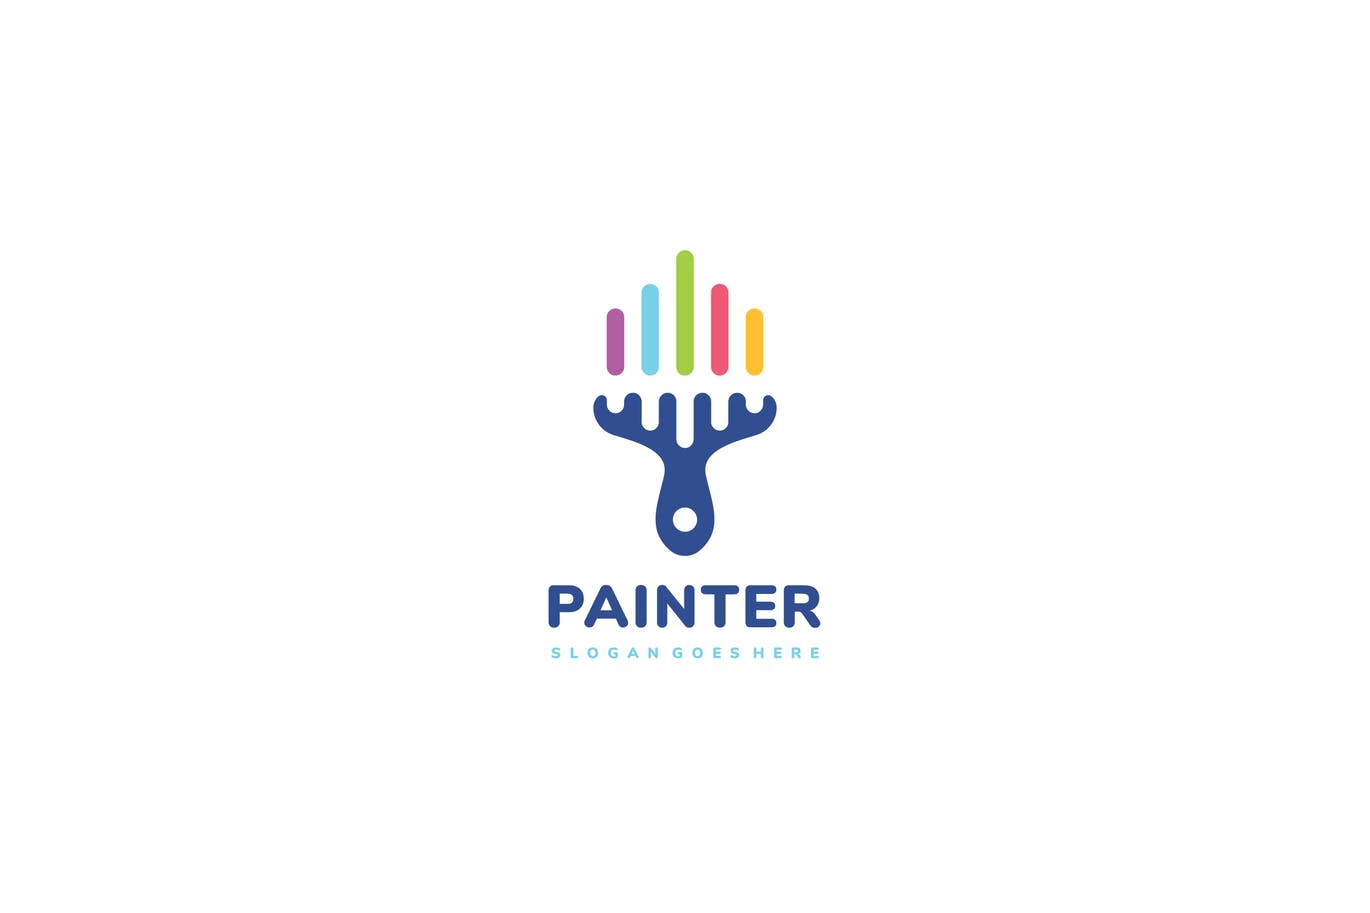 A colorful logo for painter